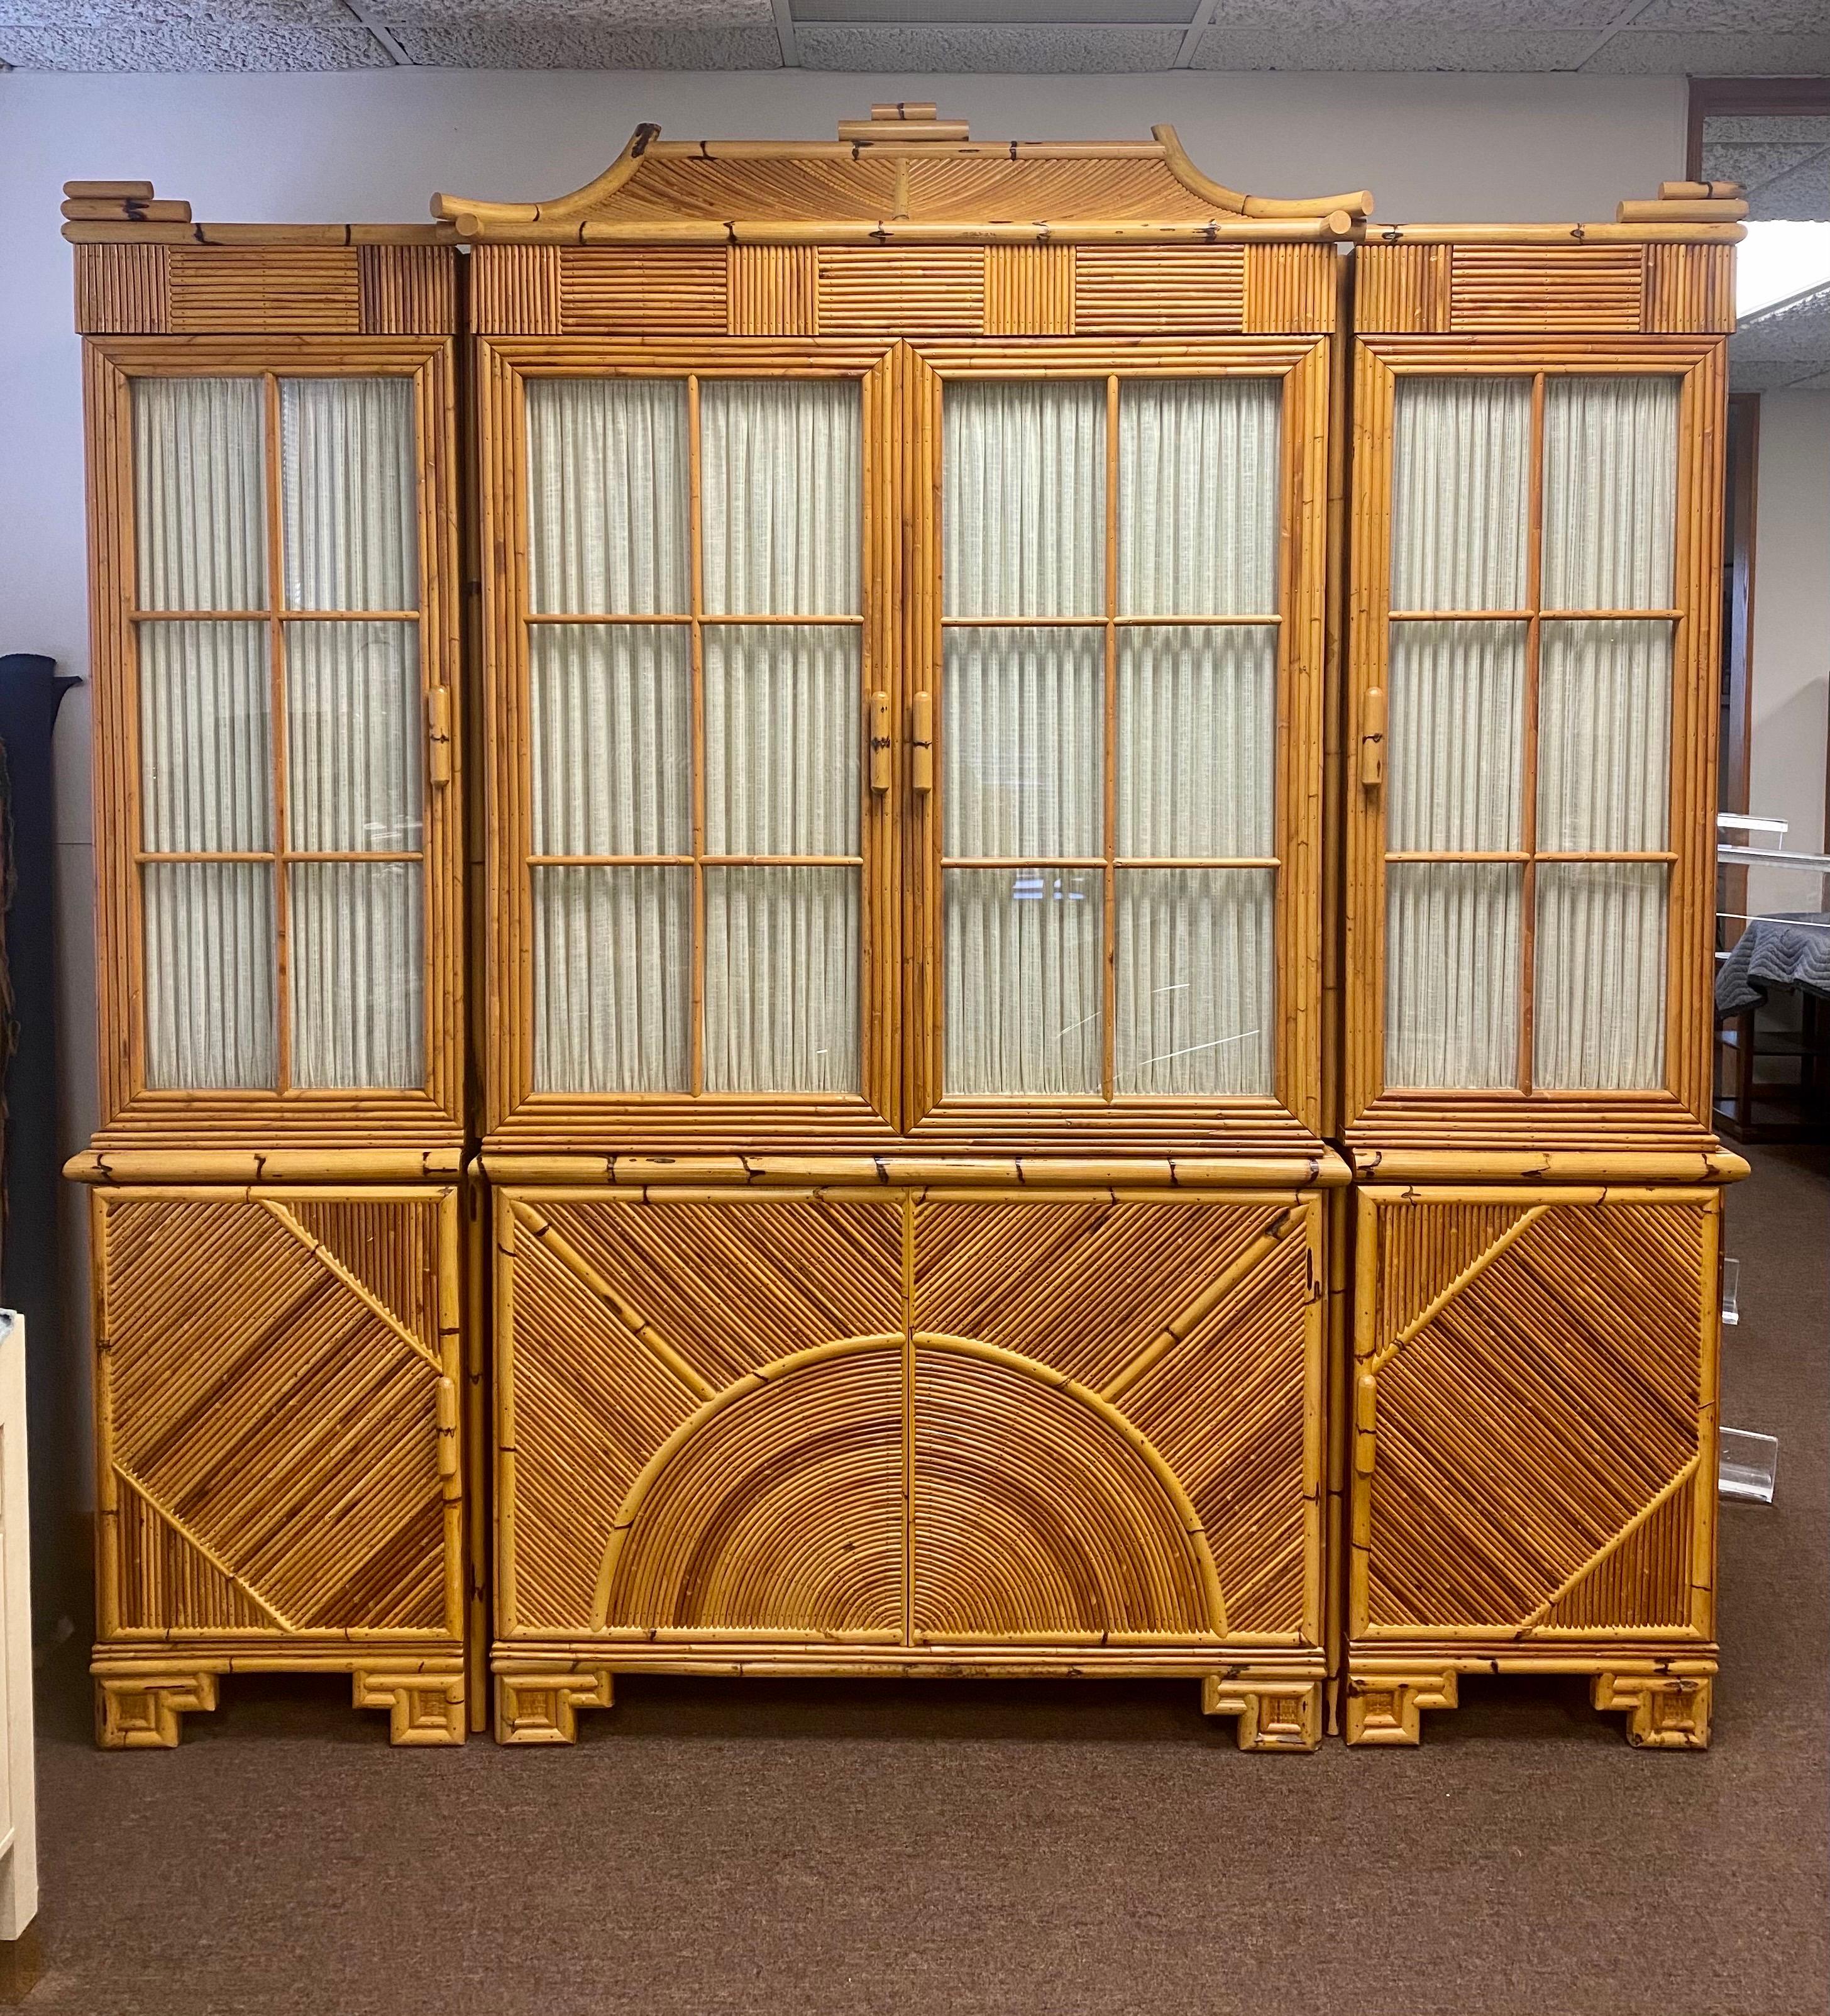 We are very pleased to offer a one-of-a-kind display cabinet, circa the 1960s. Framed in solid wood, this beautiful piece showcases exquisite craftsmanship at its finest, hand-applied split reed bamboo wraps the entire unit; the result, an organic